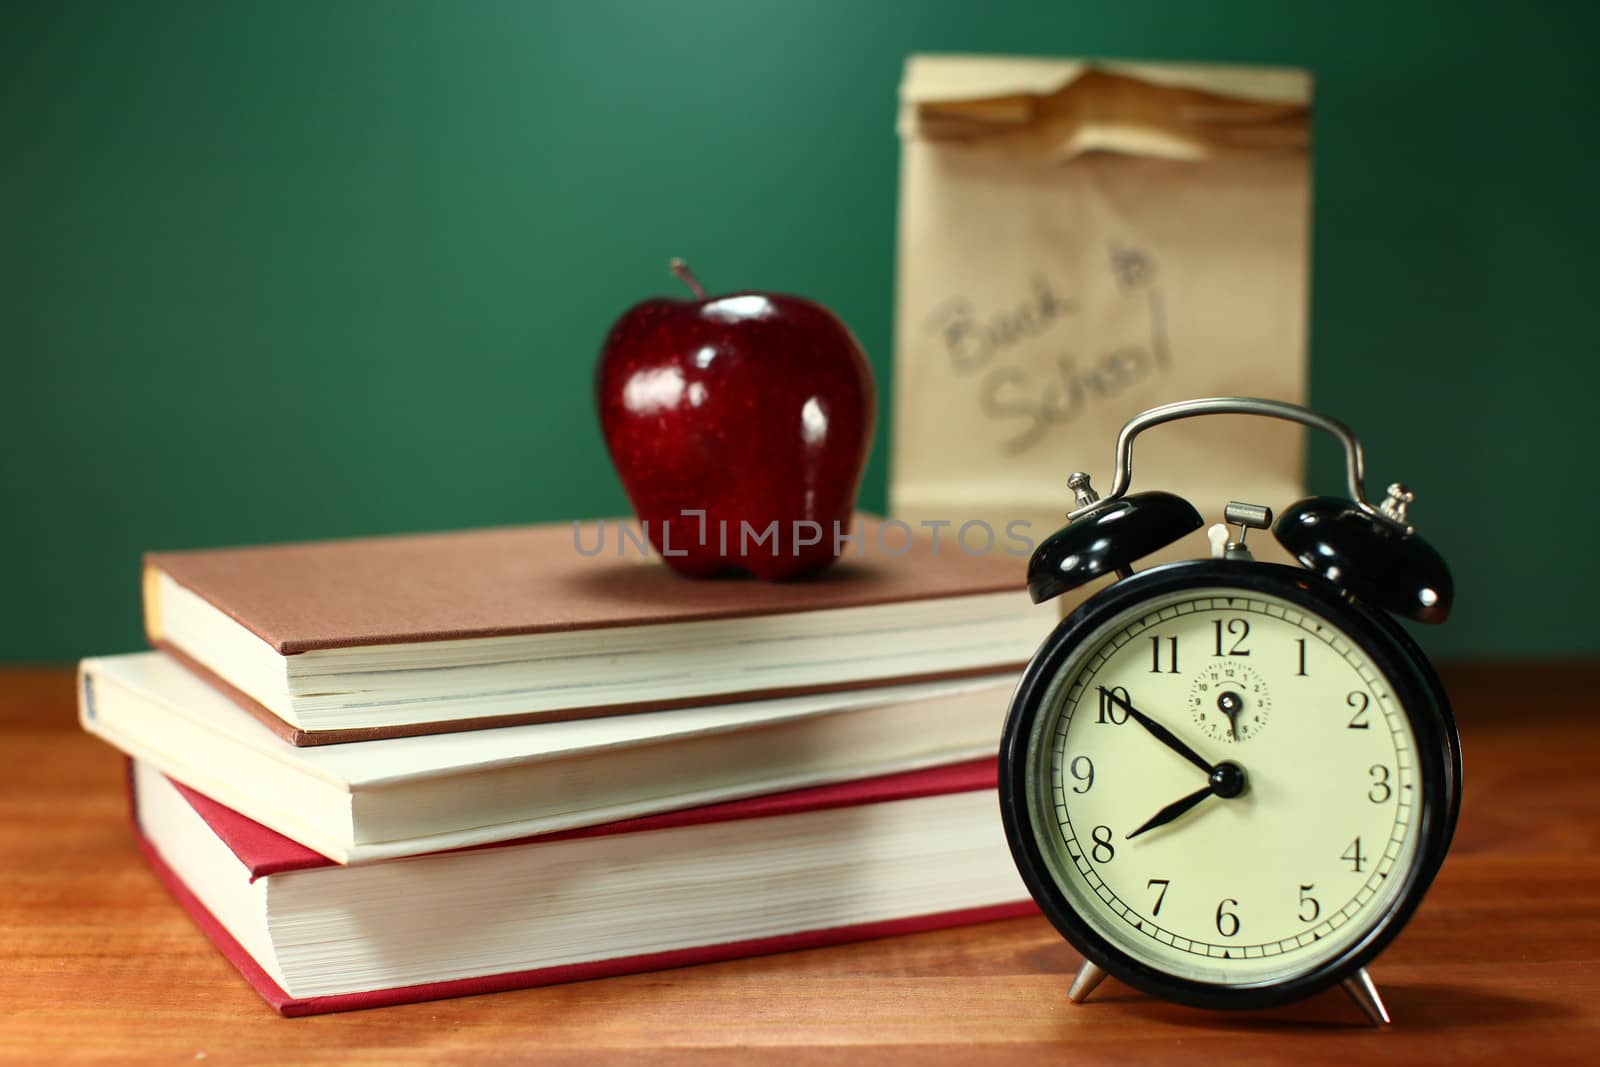 Back to School Books, Lunch, Apple and Clock on Desk